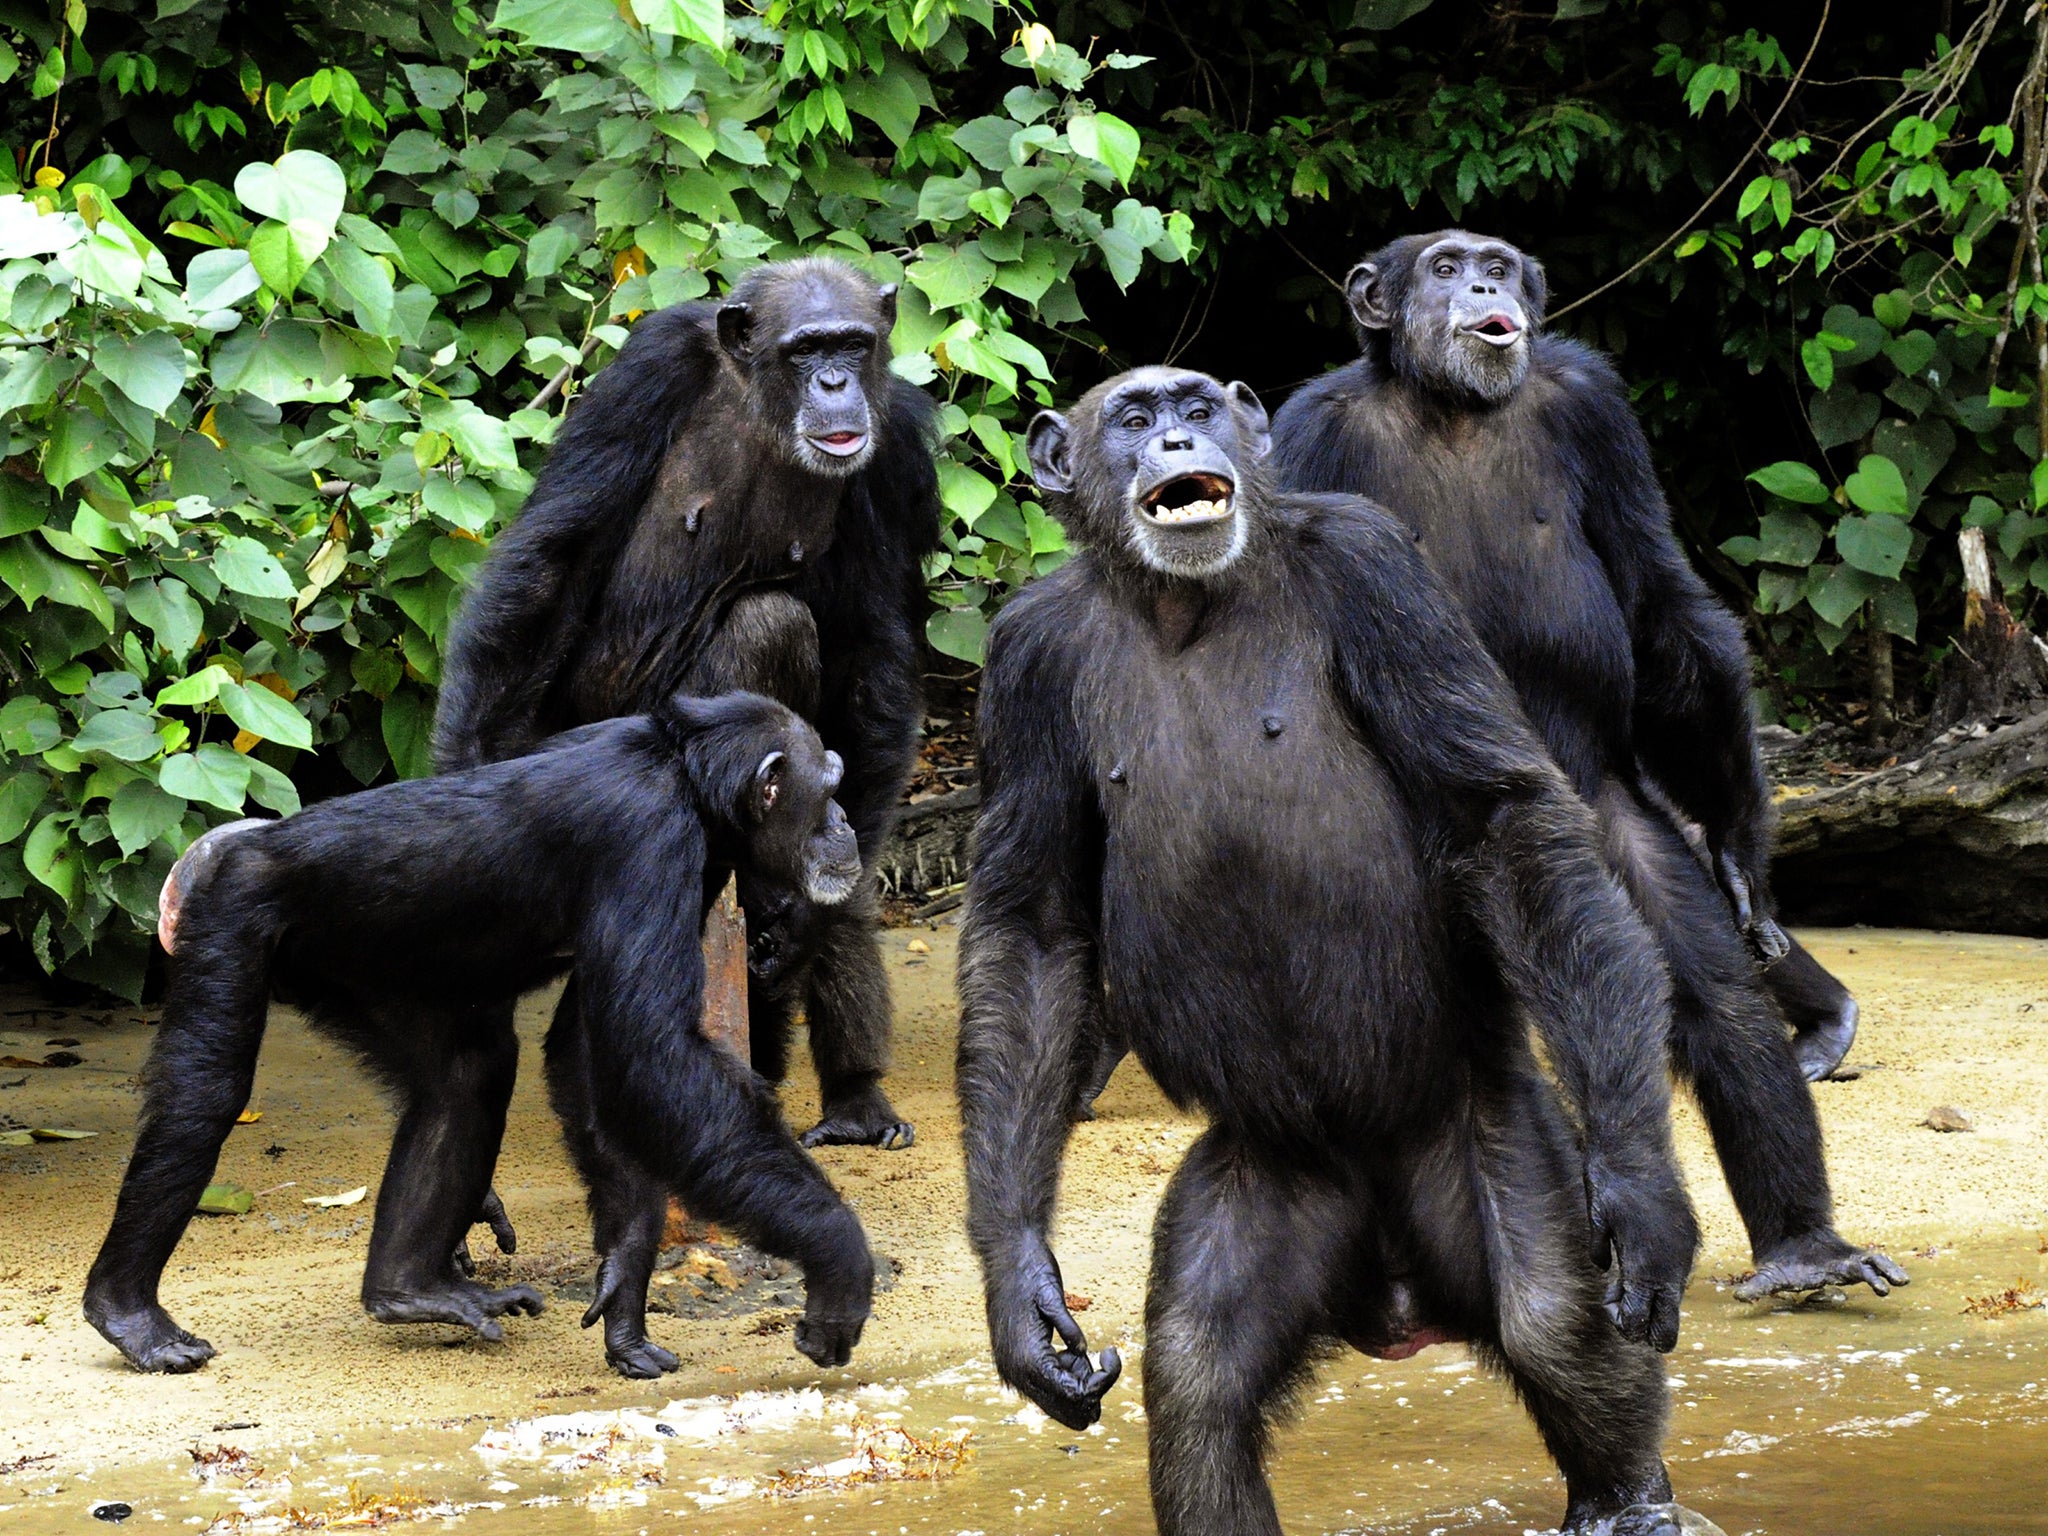 Chimps’ beds may be cleaner because they make them freshly in treetops each day